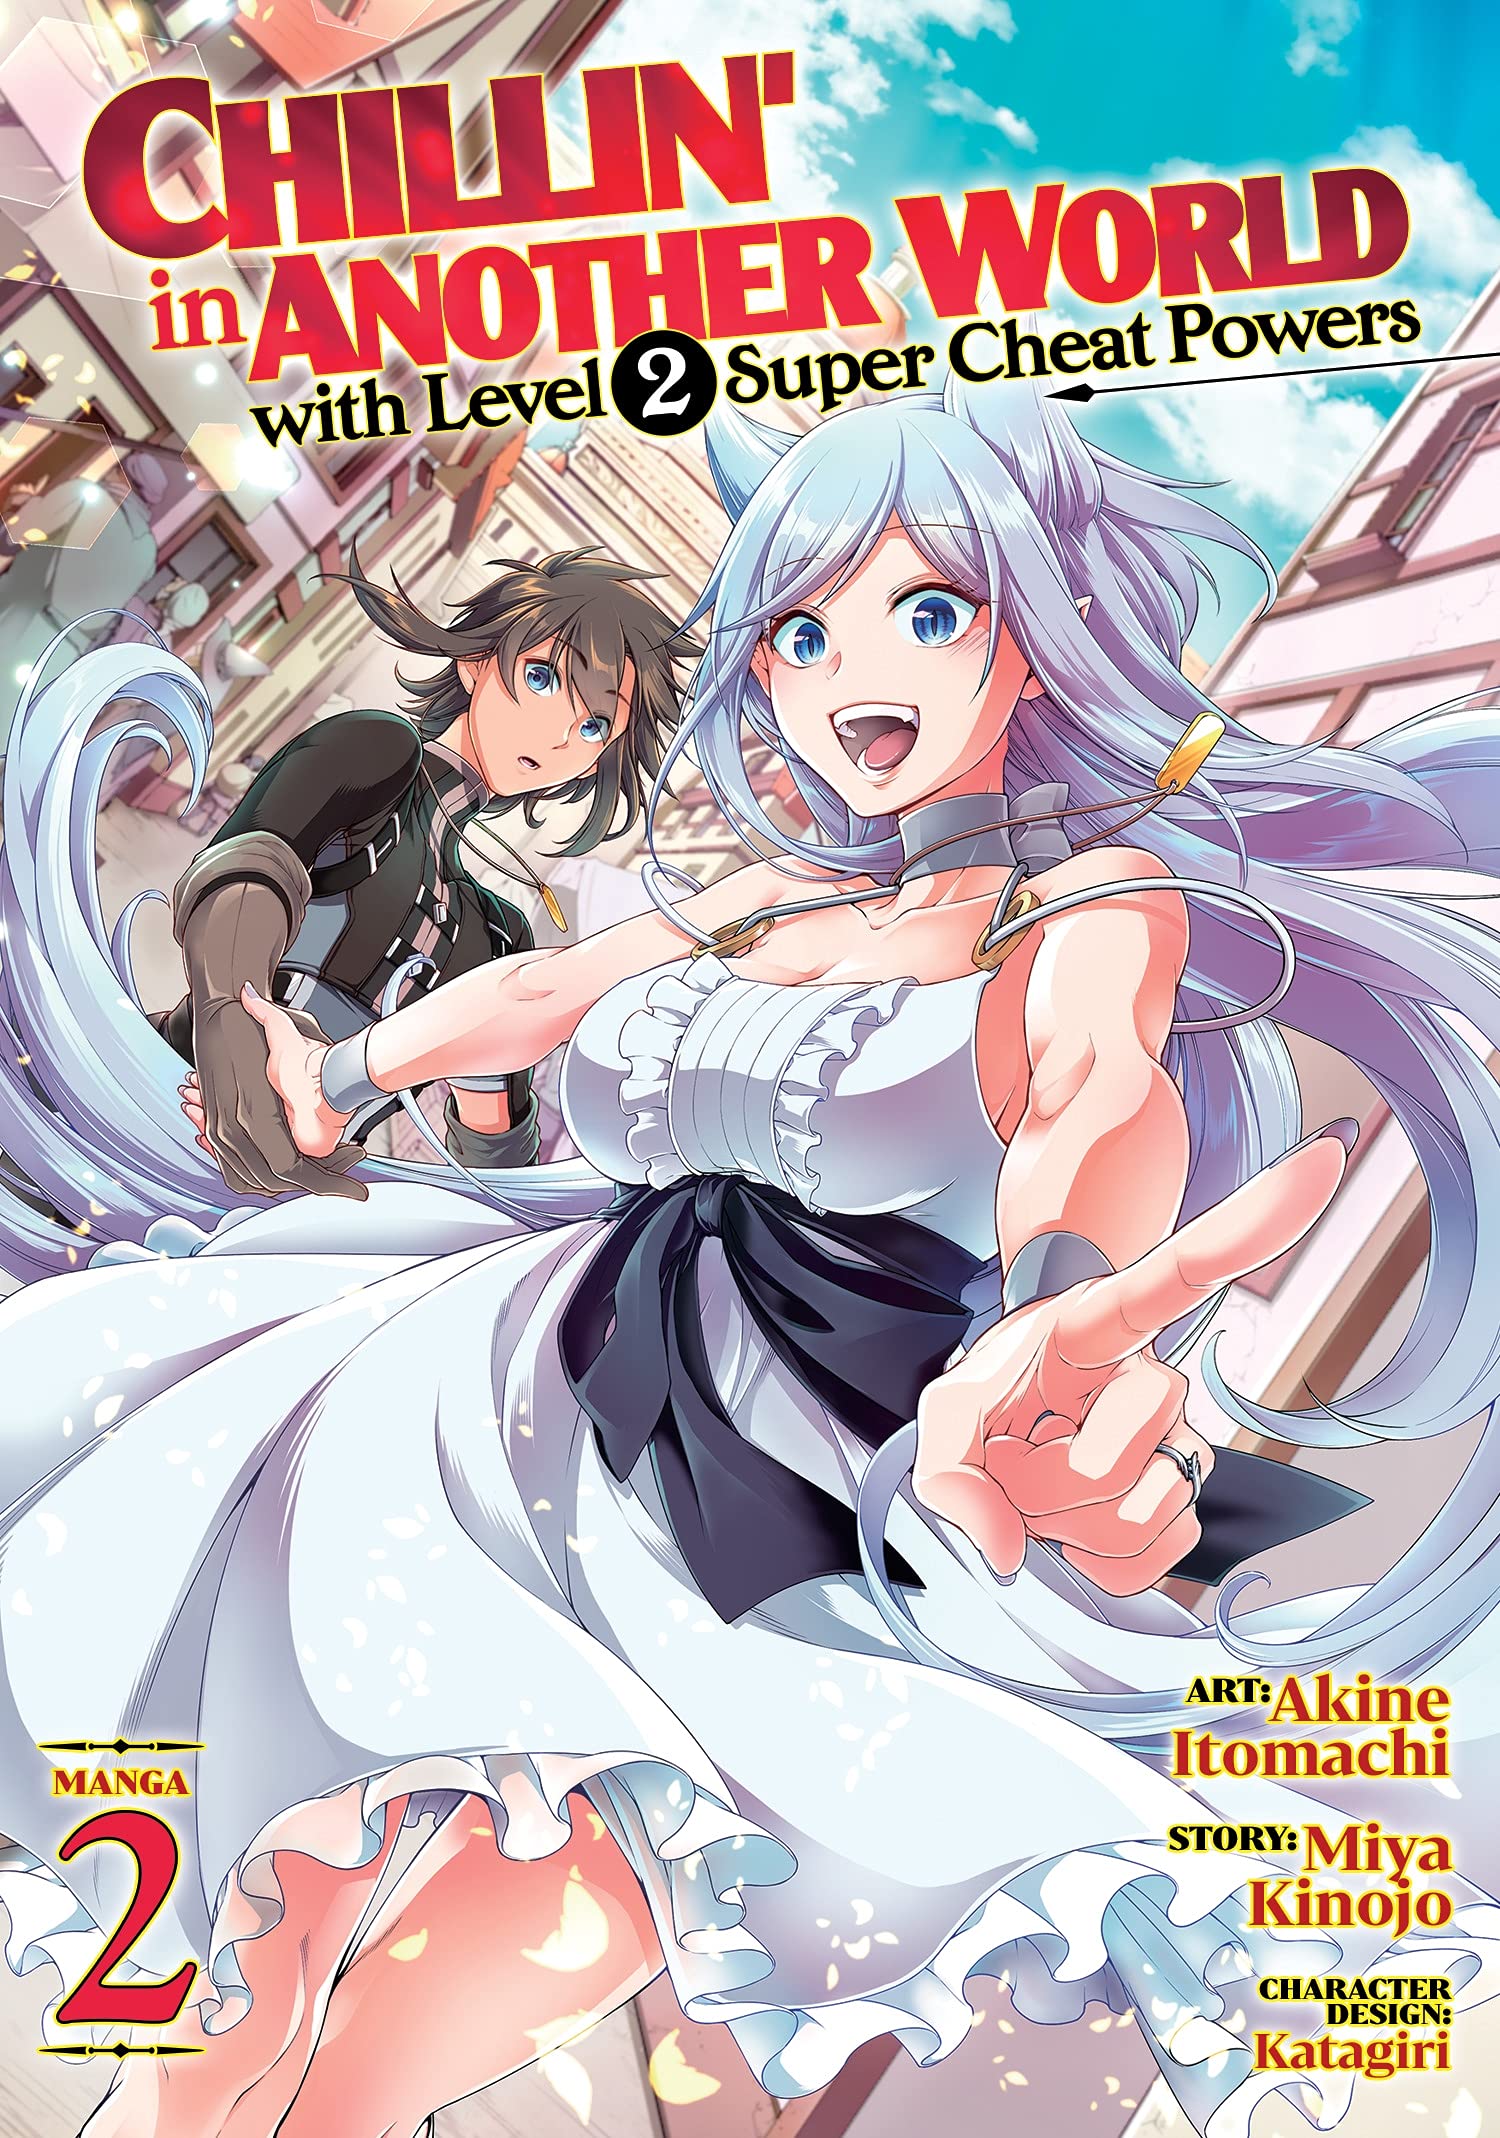 Chillin’ in Another World with Level 2 Super Cheat Powers (Manga) Vol. 02